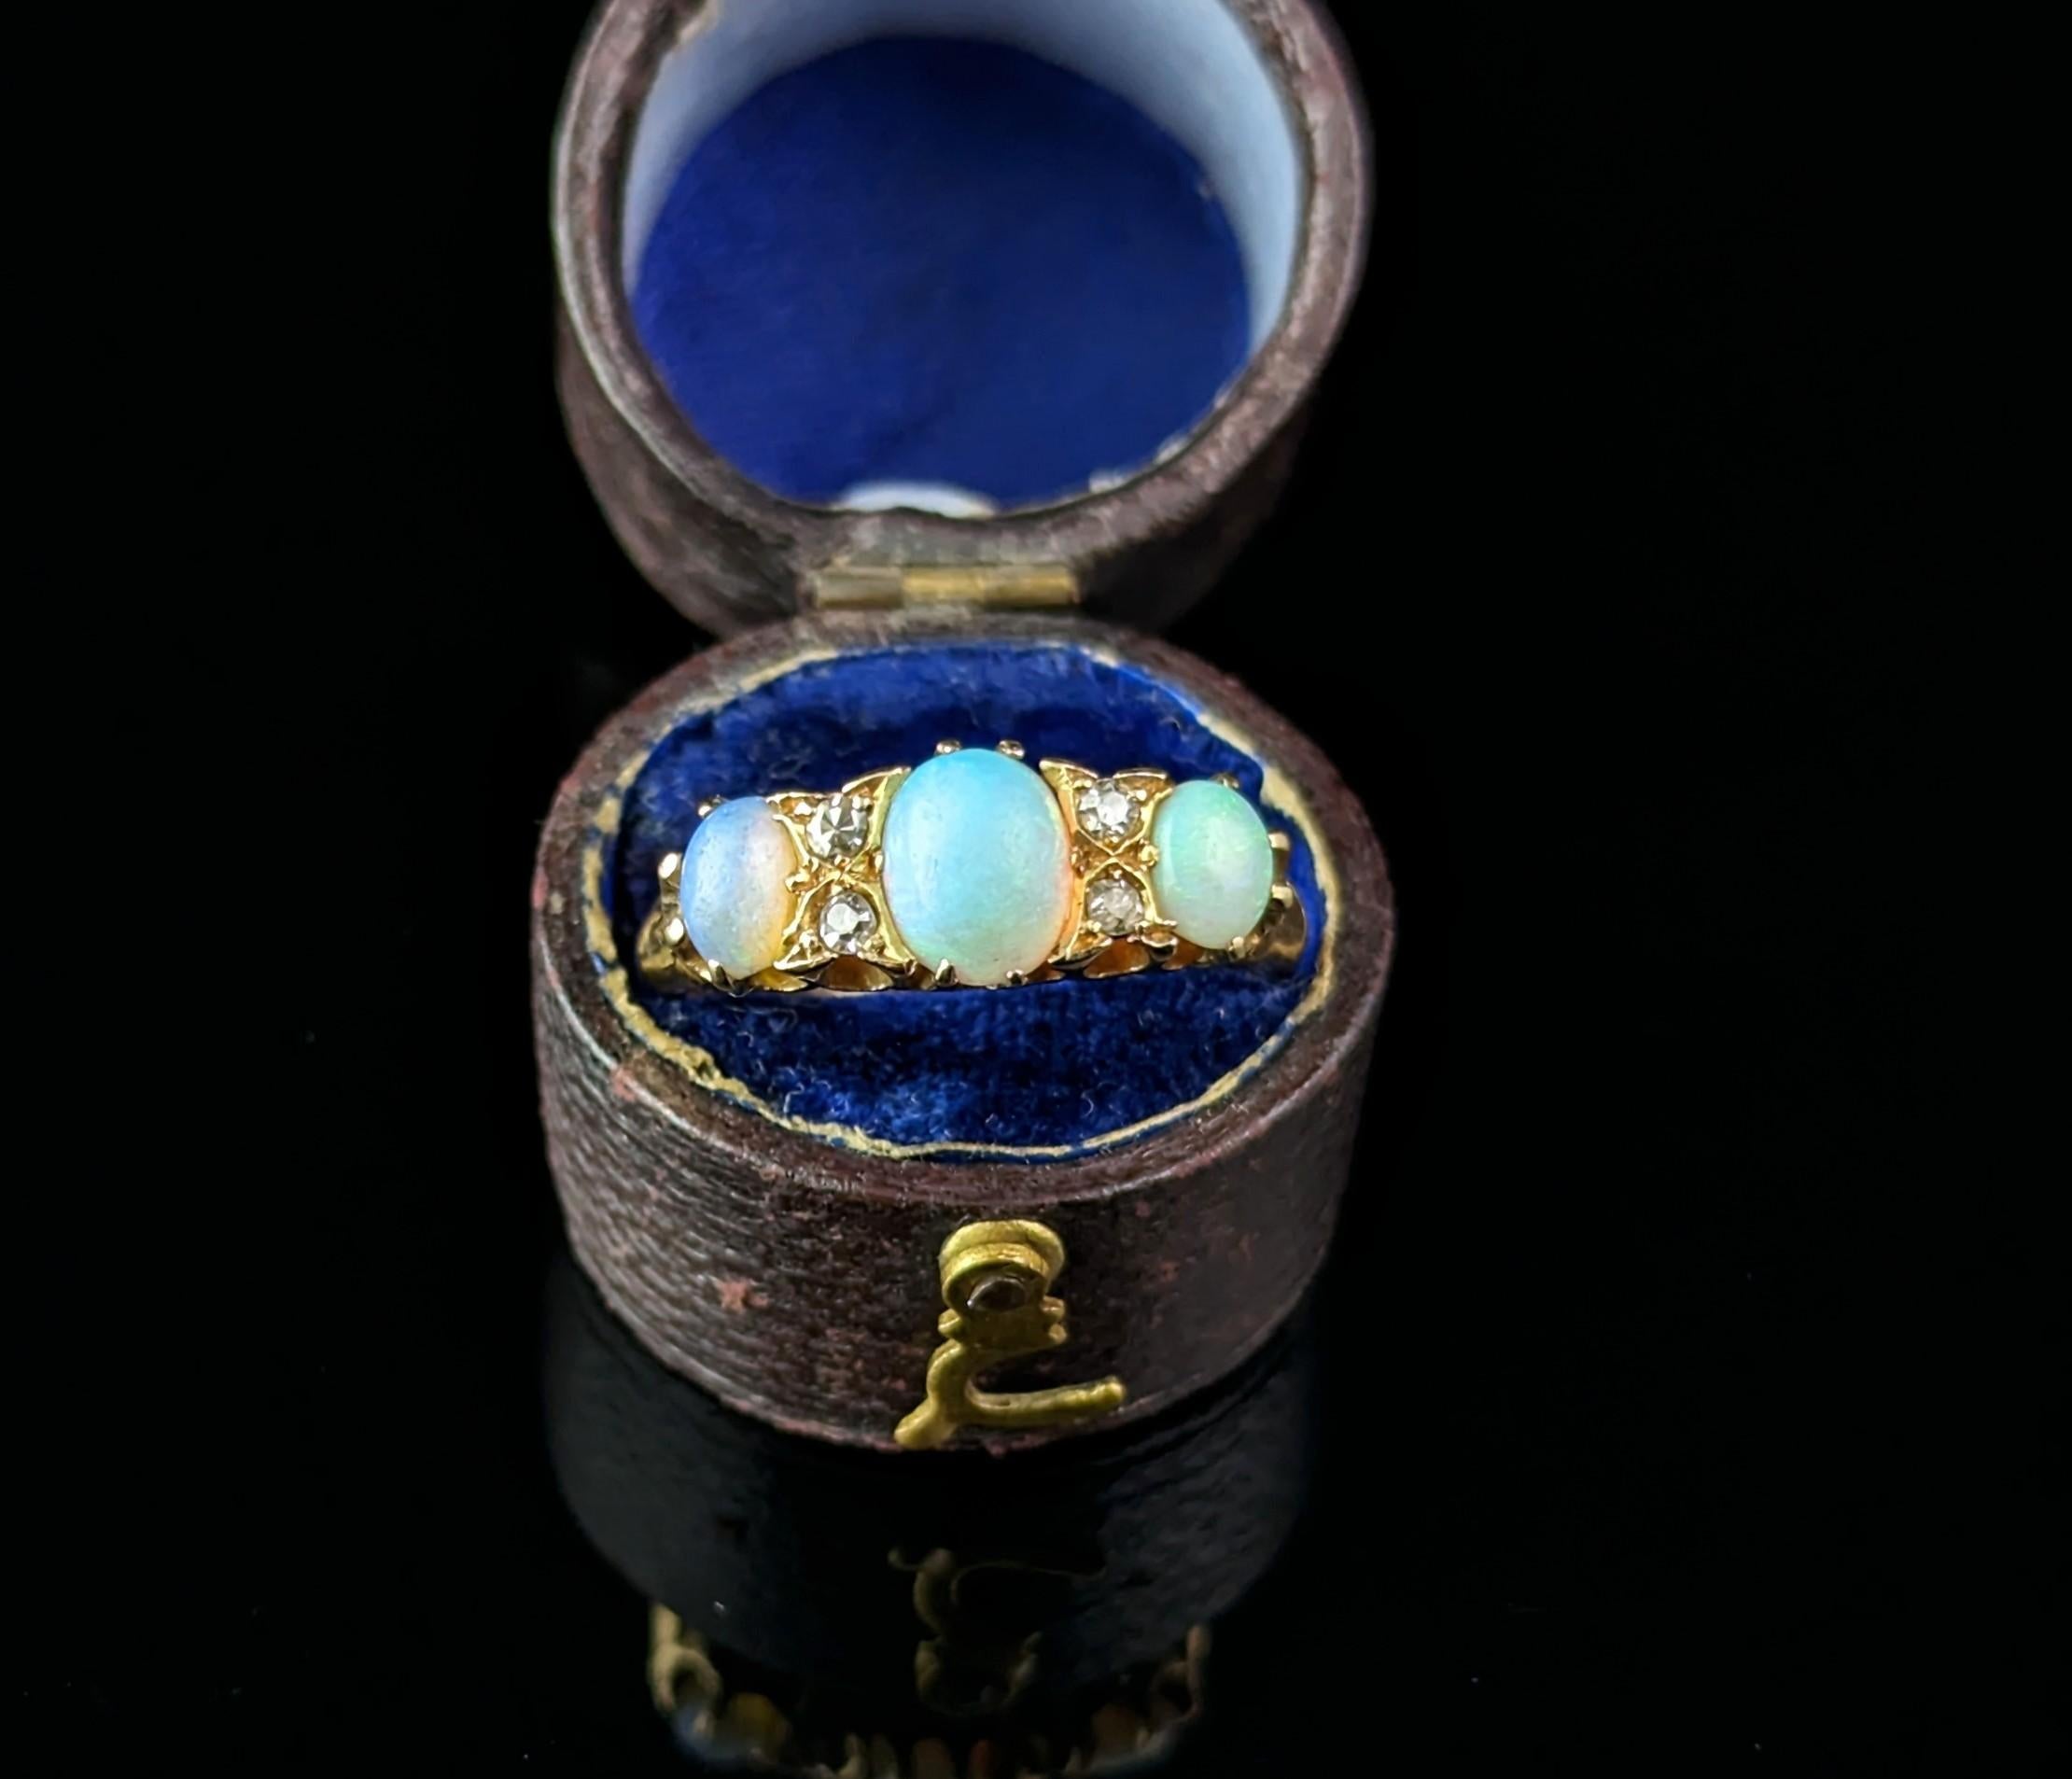 You can't help but be enchanted by this gorgeous antique, Edwardian era opal and old cut diamond ring.

A rich 18ct yellow gold band with a boat head style setting and decorative engraved shoulders.

The face is set with three beautiful opal